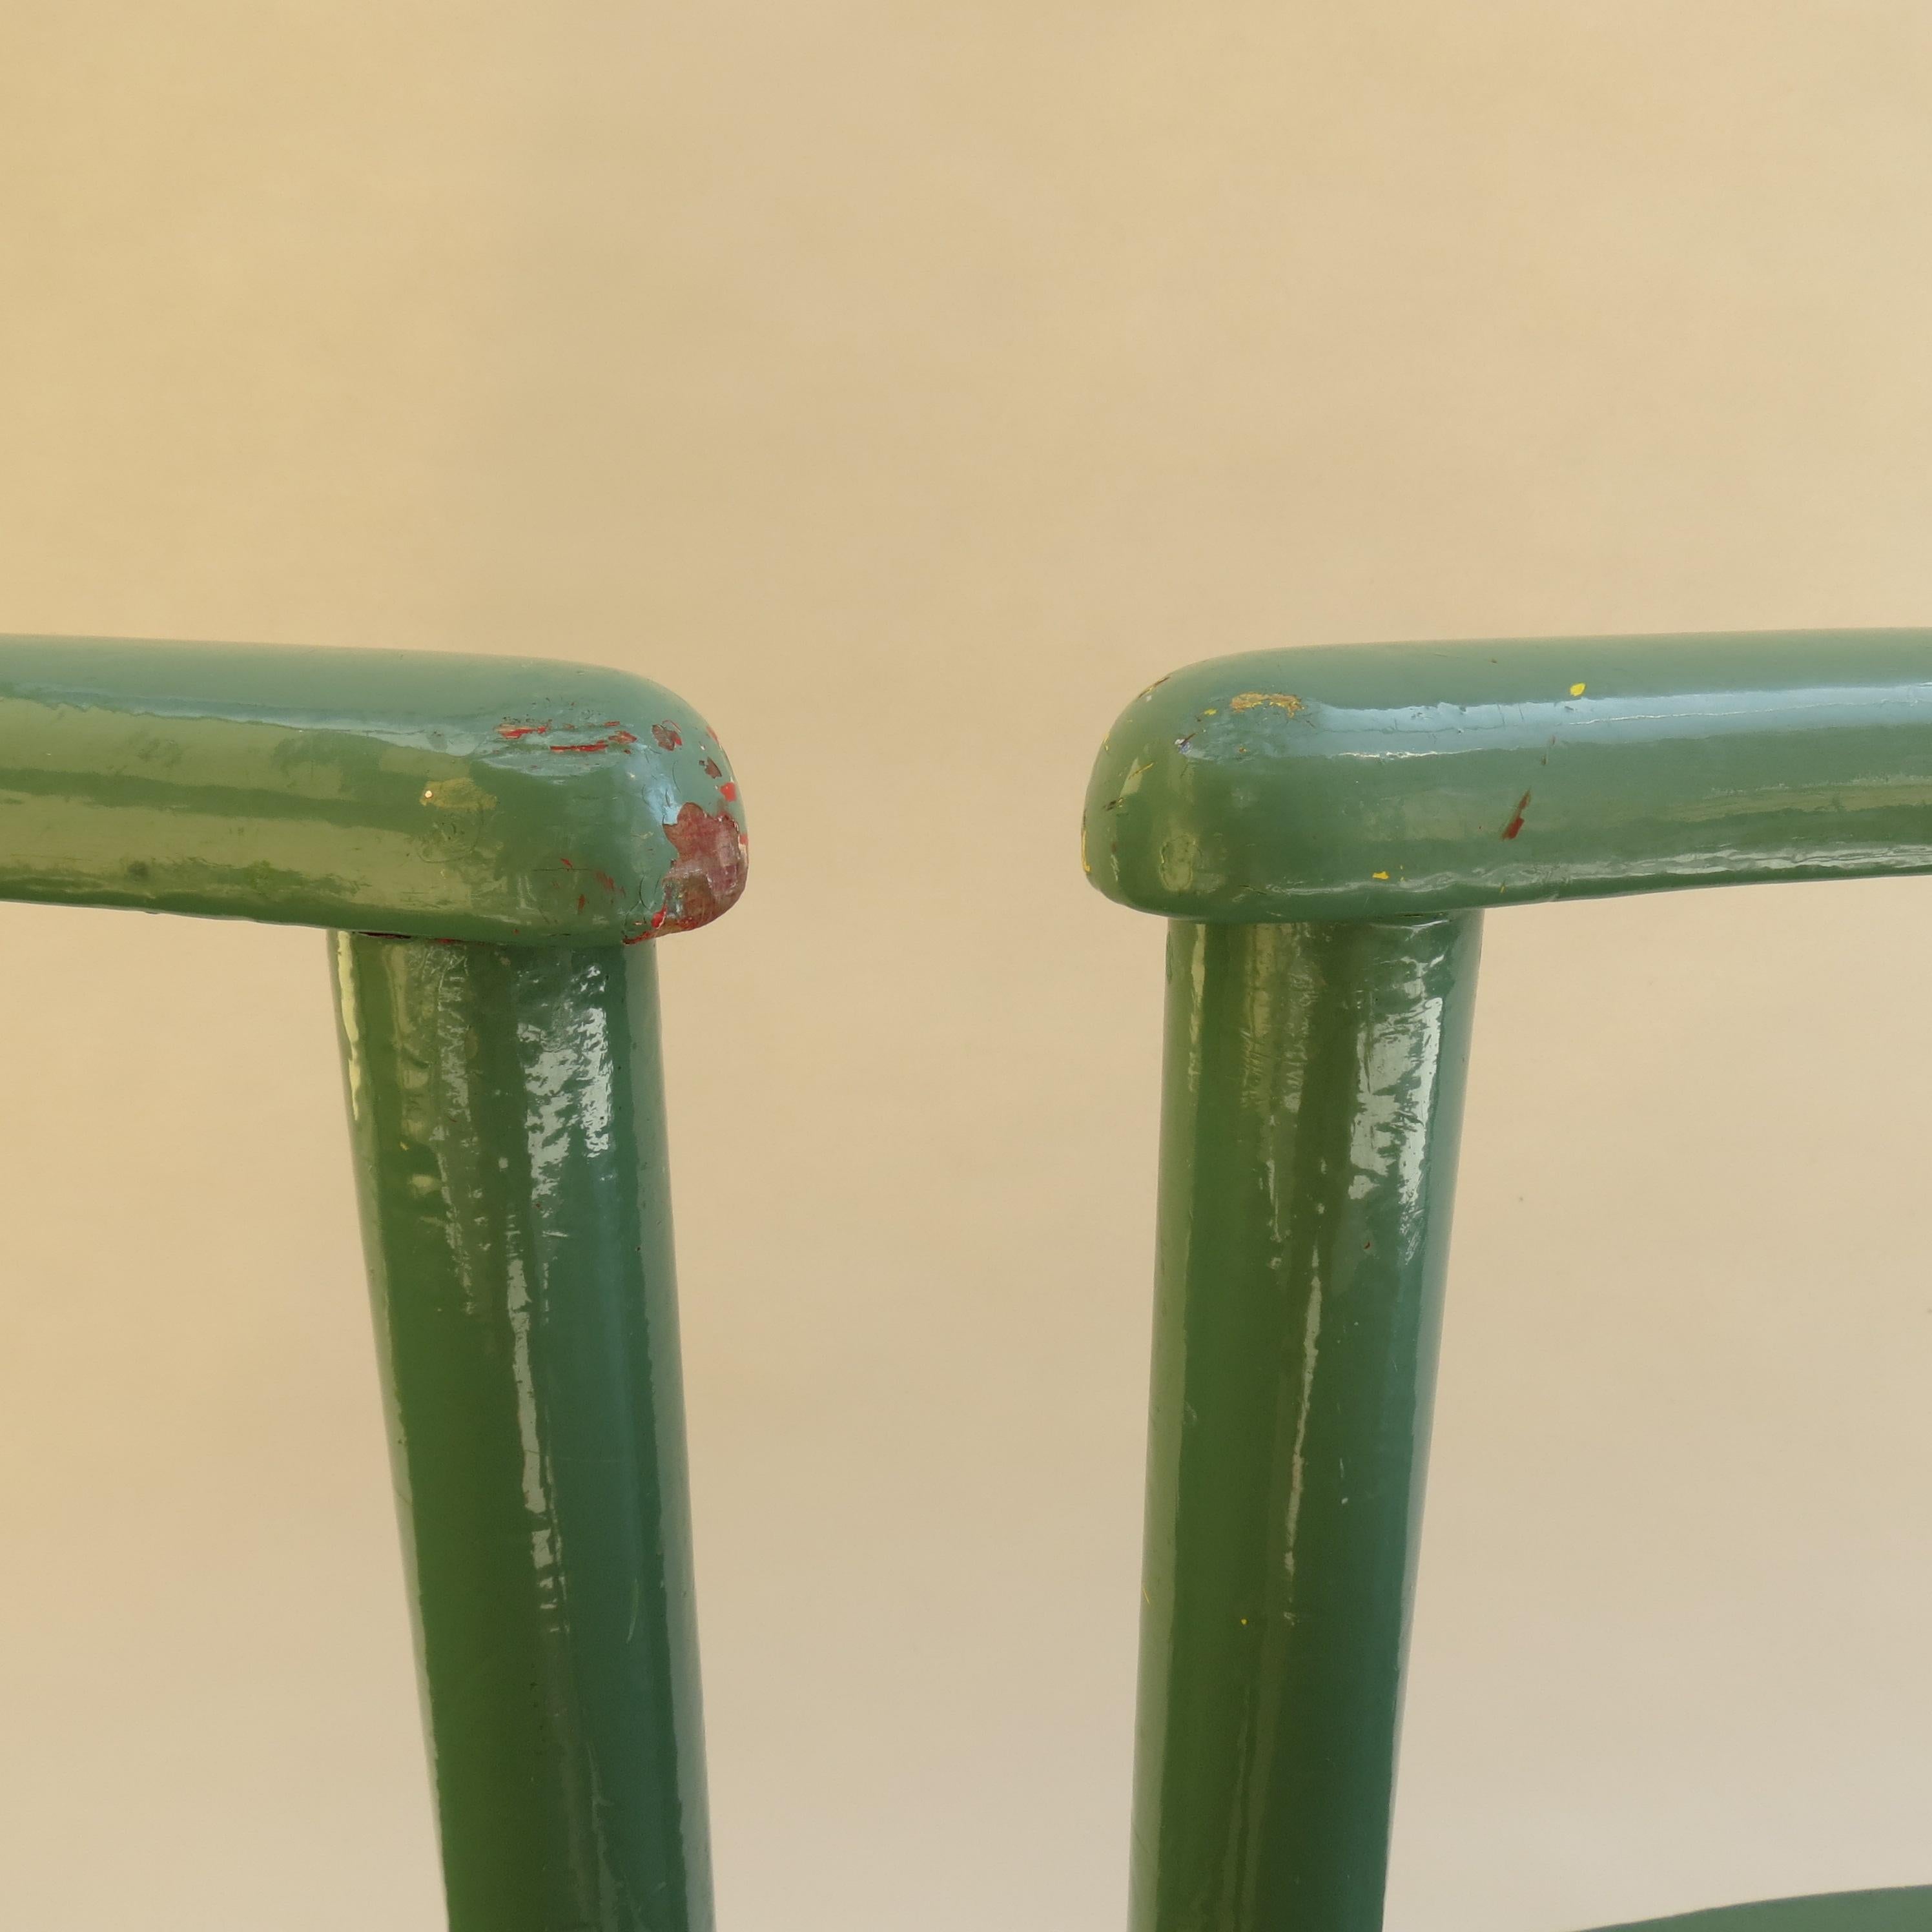 Pair of Scandinavian Childs Chairs in Green from the 1960s 1